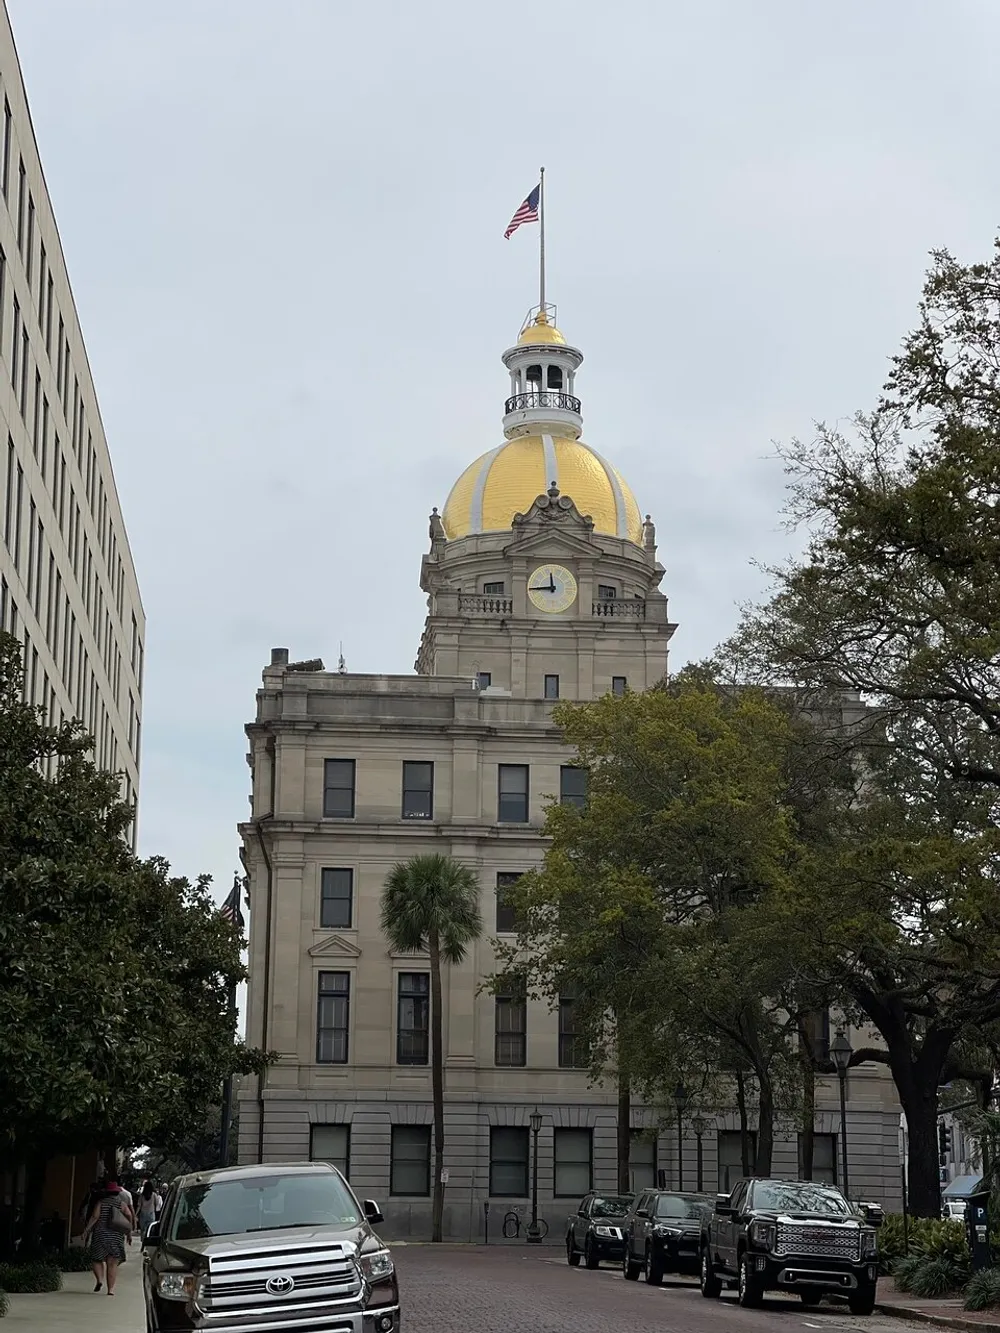 The image shows a street view featuring the dome of a grand historic building with an American flag on top flanked by modern office buildings and vehicles parked along the curb under an overcast sky